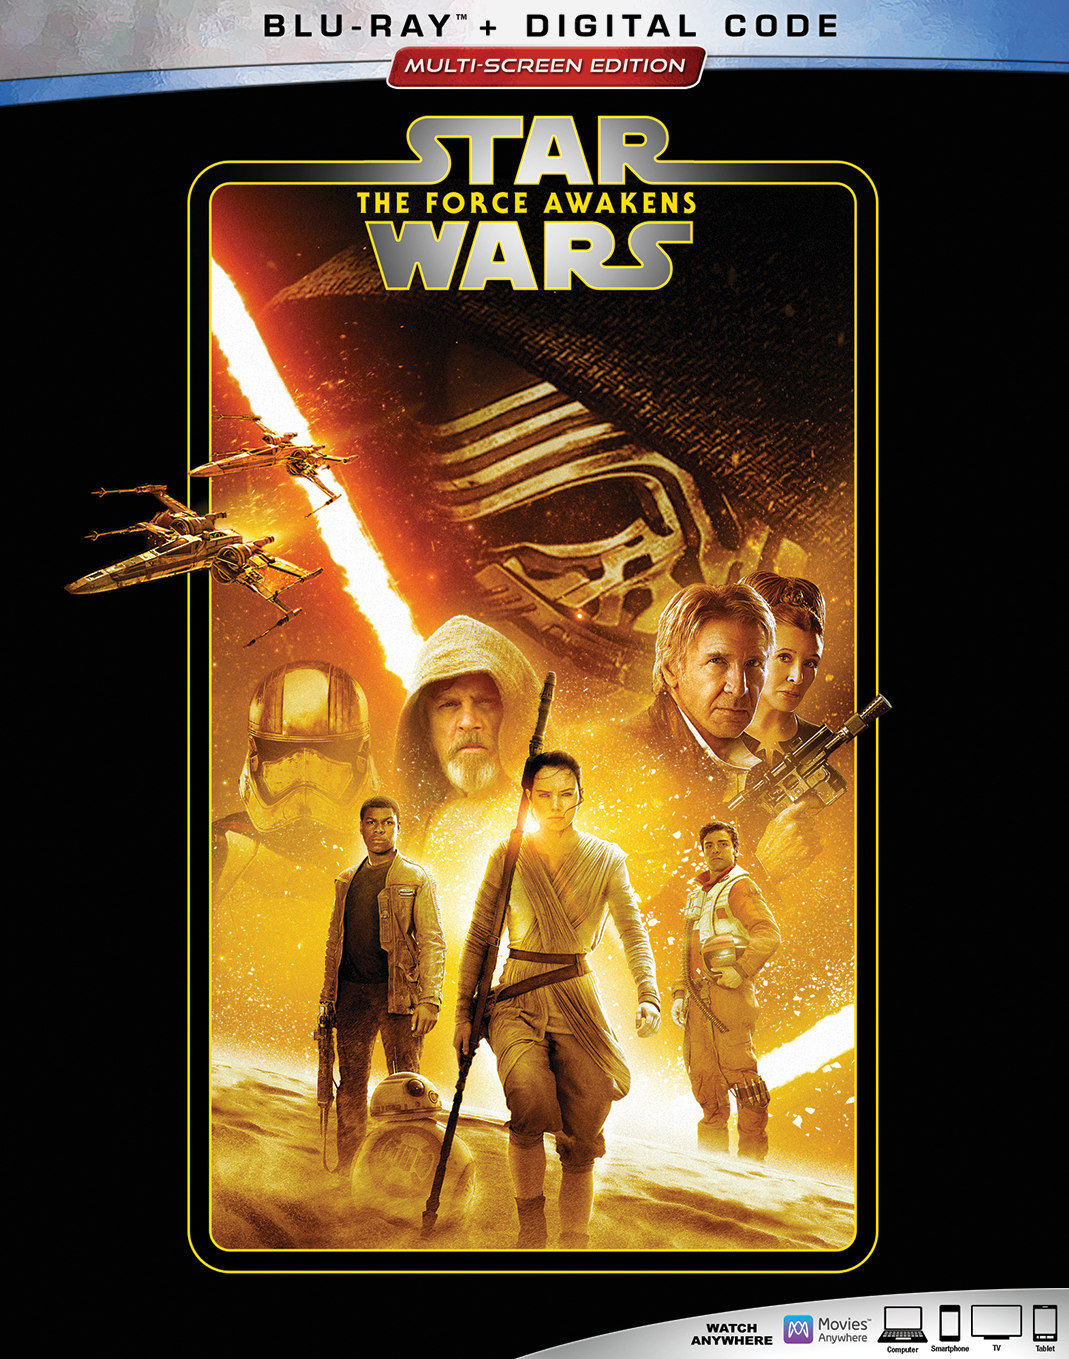 Star Wars The Force Awakens Includes Digital Copy Blu Ray Images, Photos, Reviews